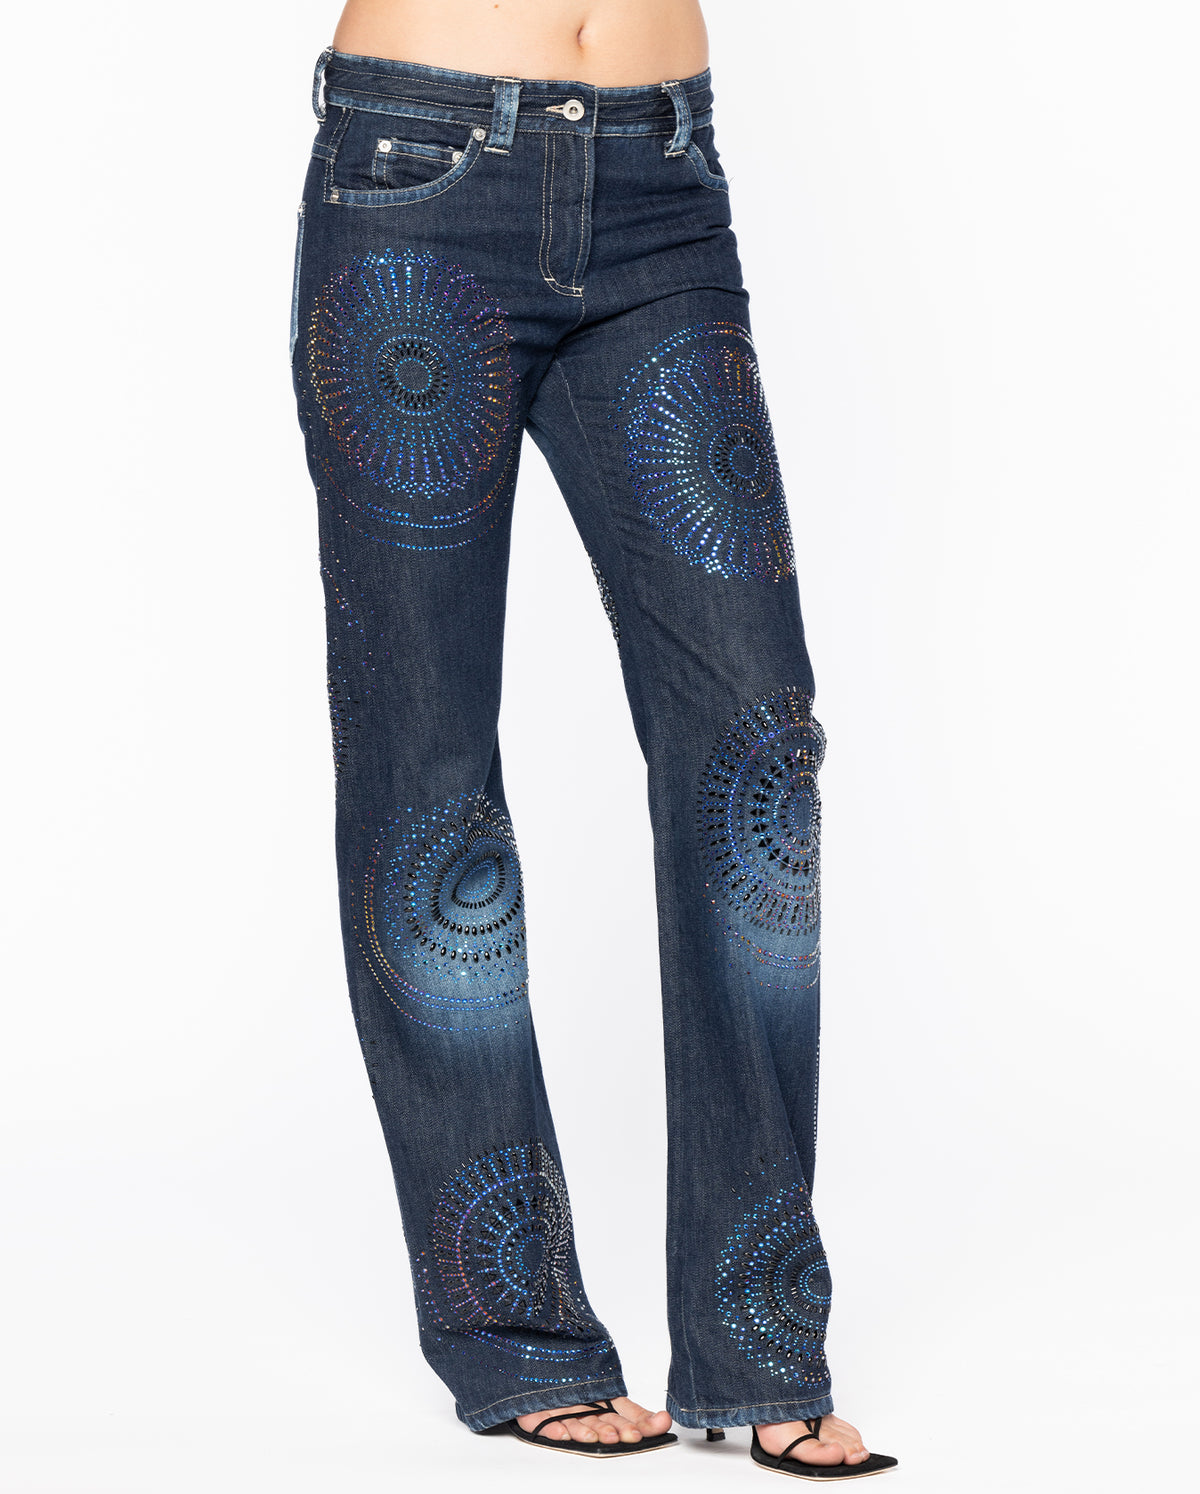 90'S GIANFRANCO FERRE Sequined Jeans